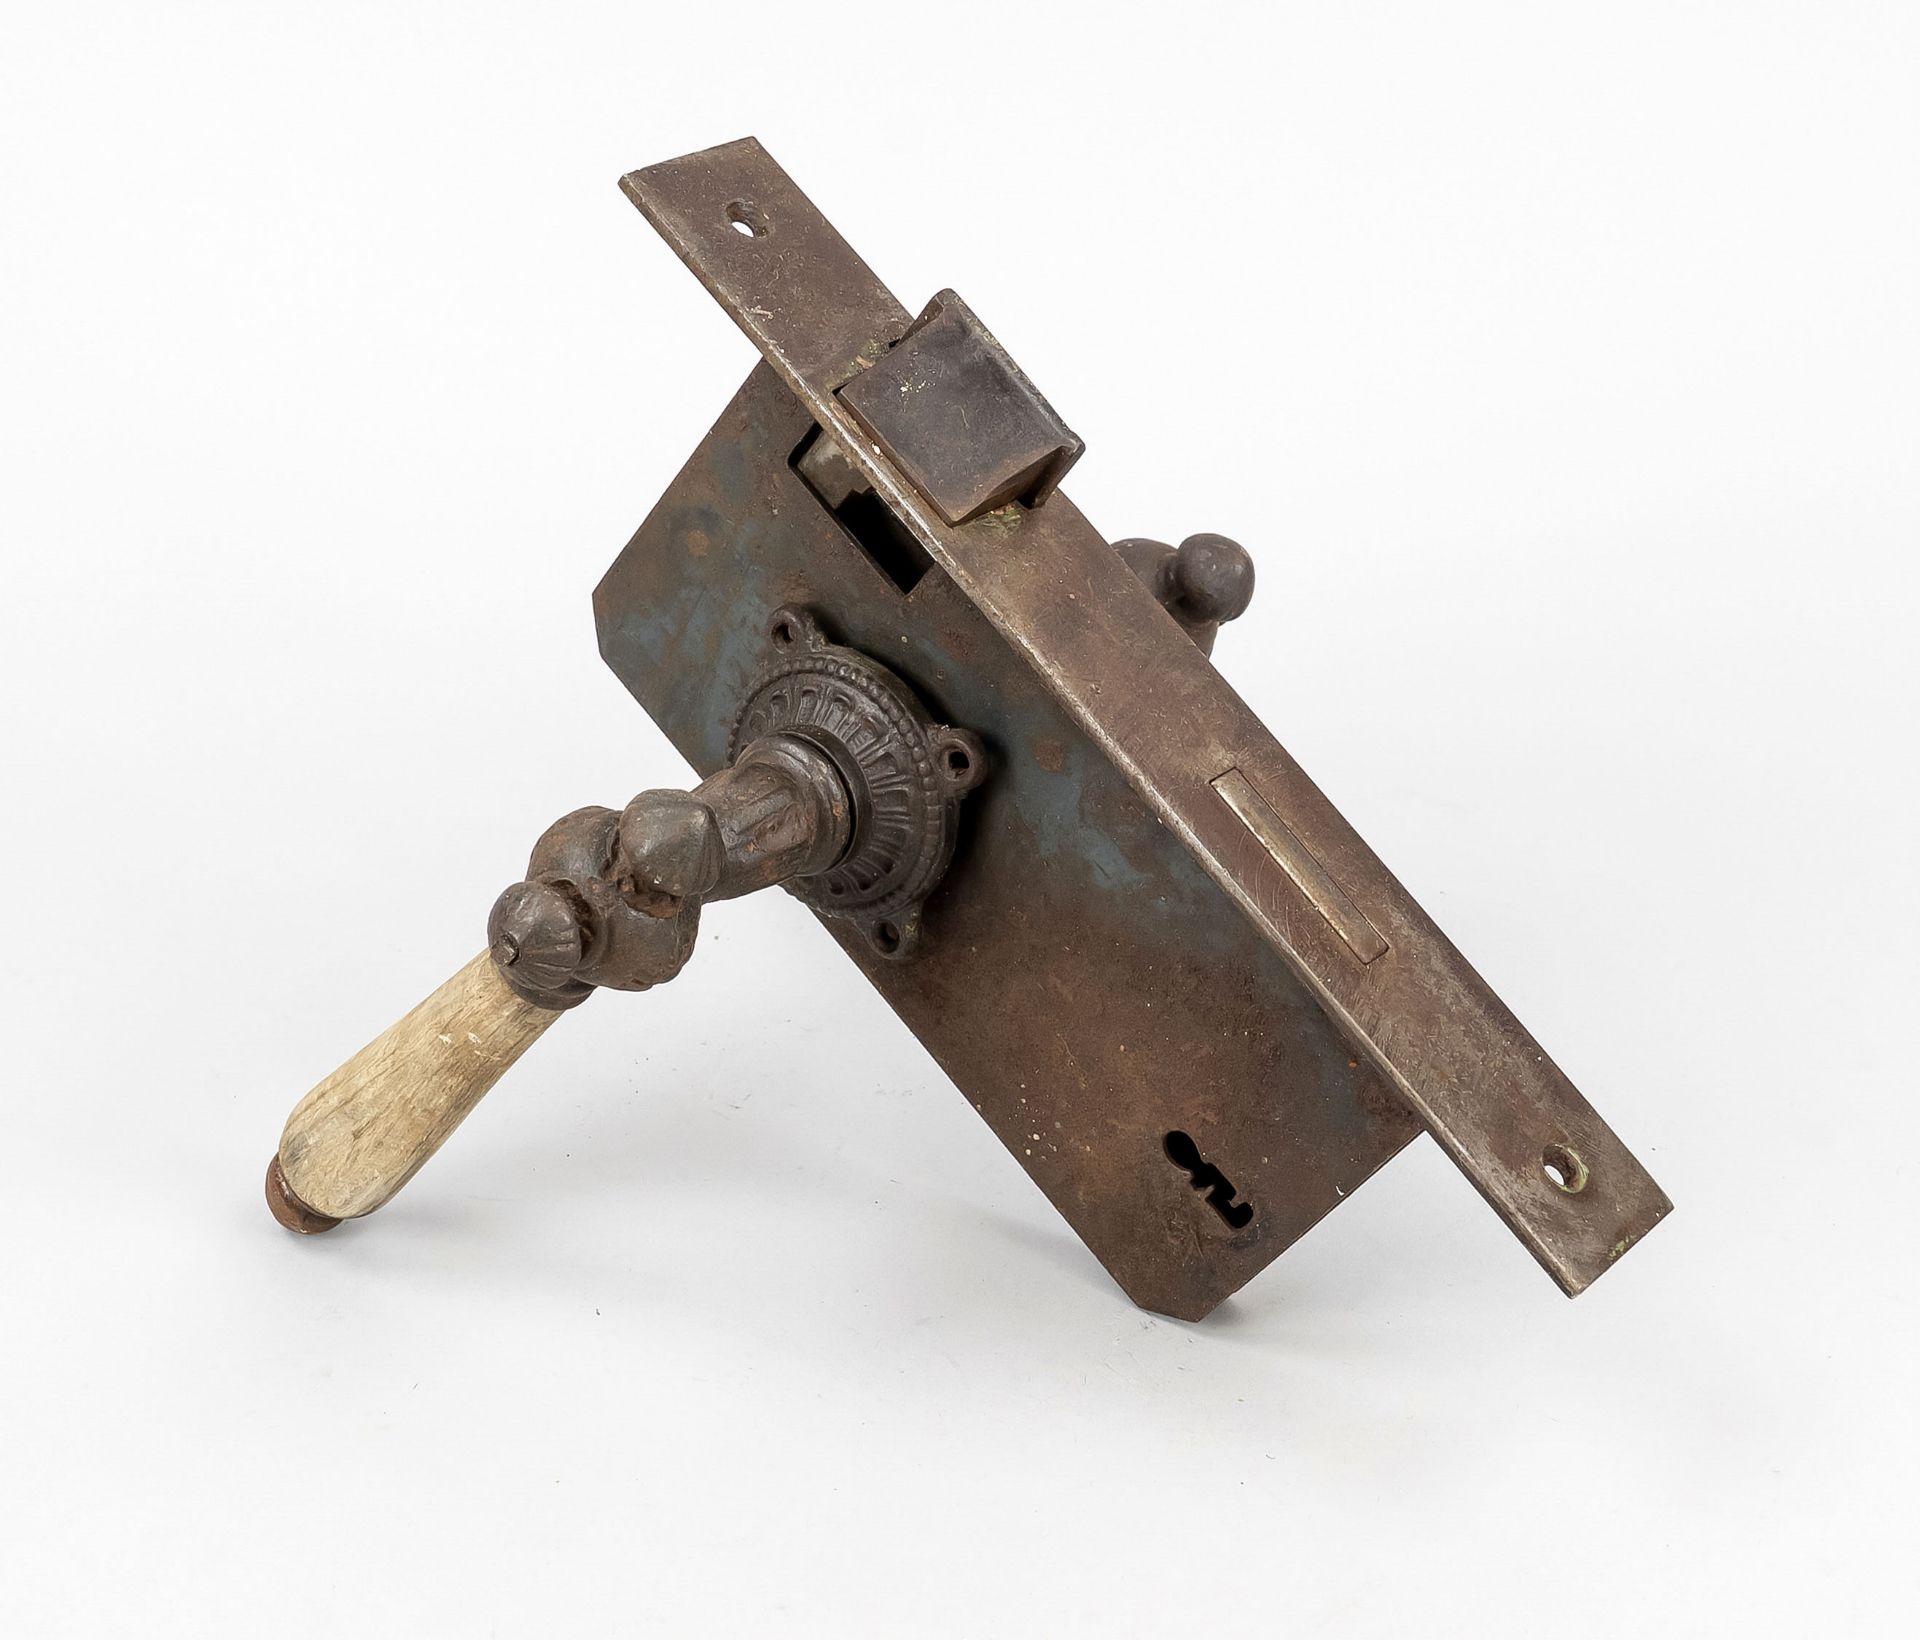 Door set with box lock, 19th c., iron, wooden handle, without key, h. 29 cm